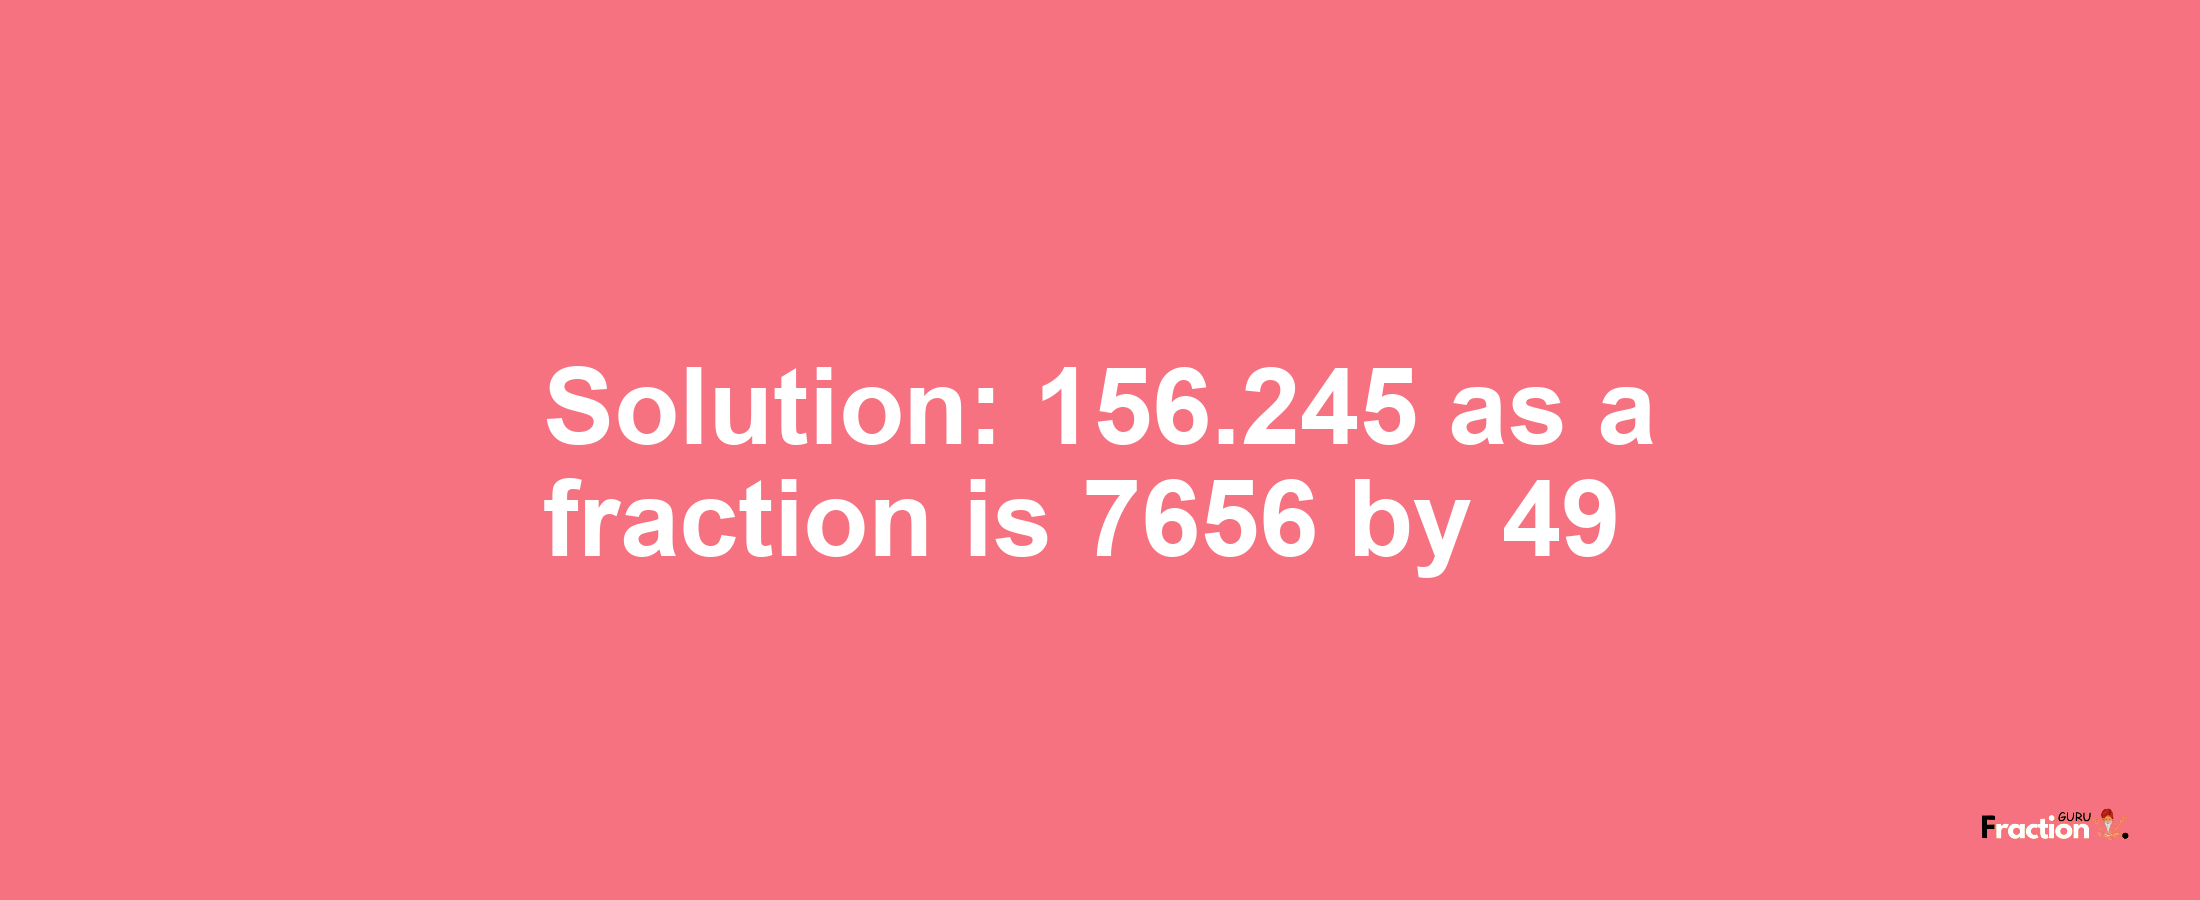 Solution:156.245 as a fraction is 7656/49